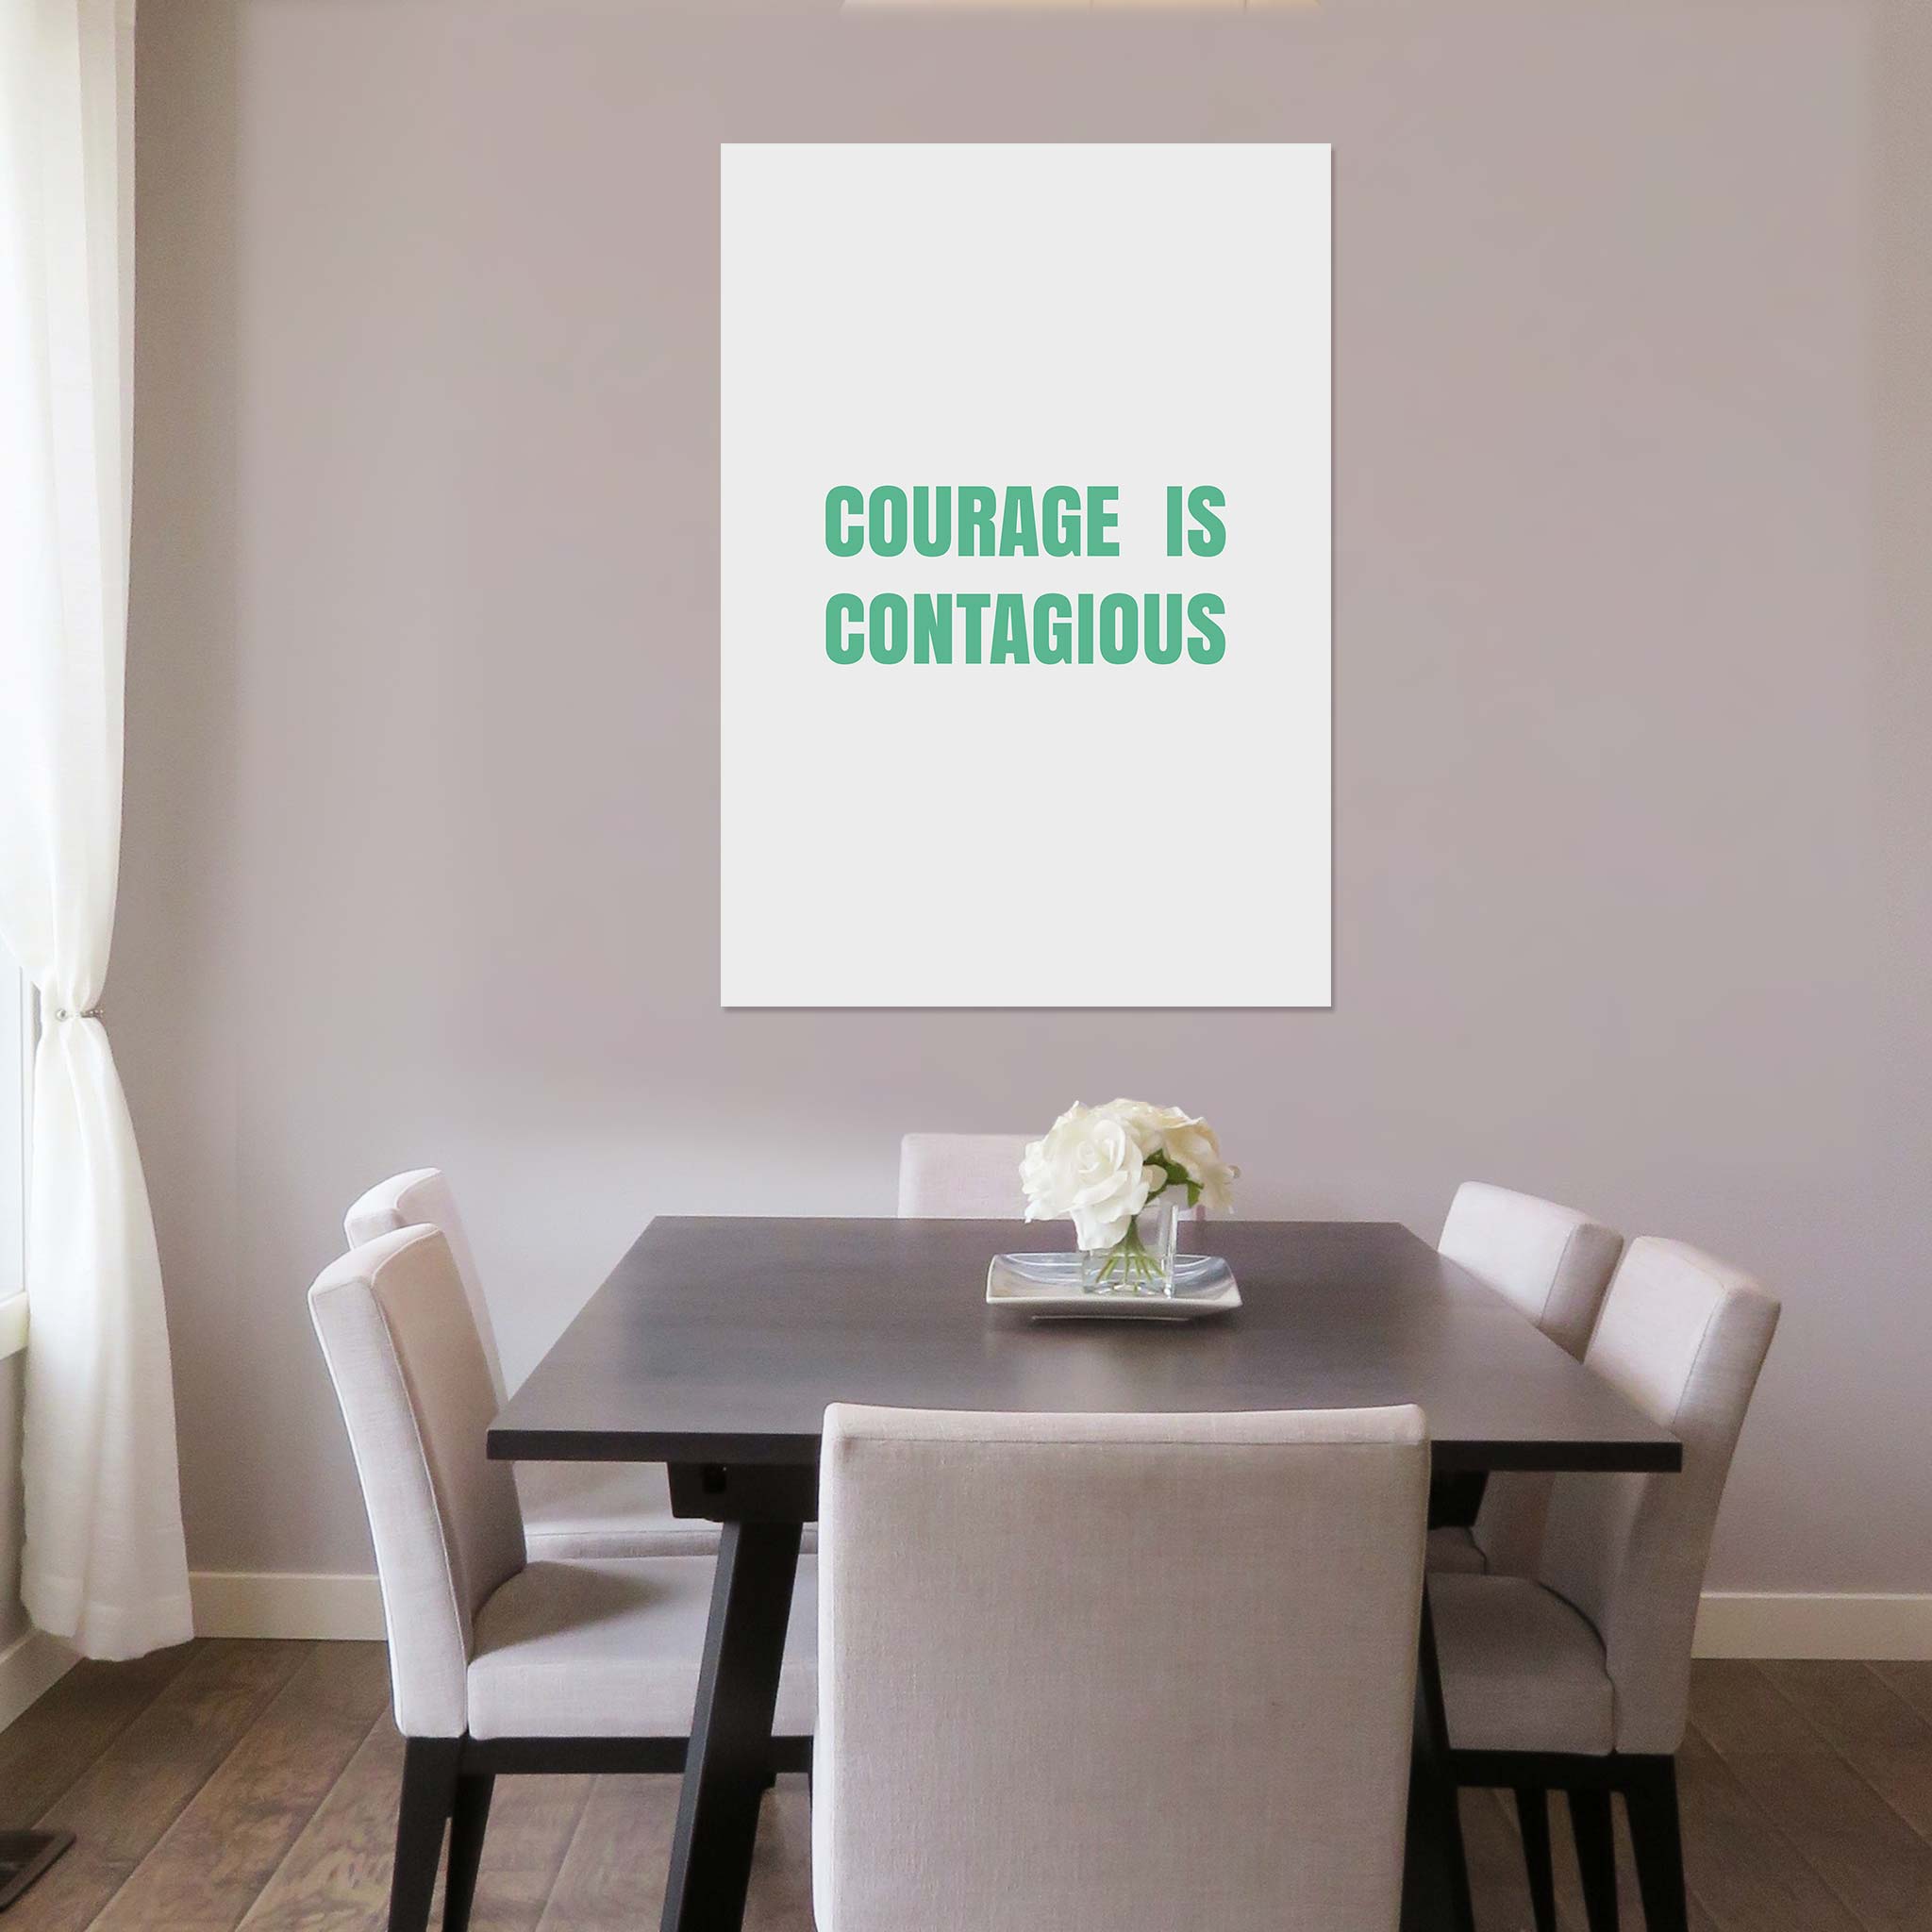 Courage is contagious